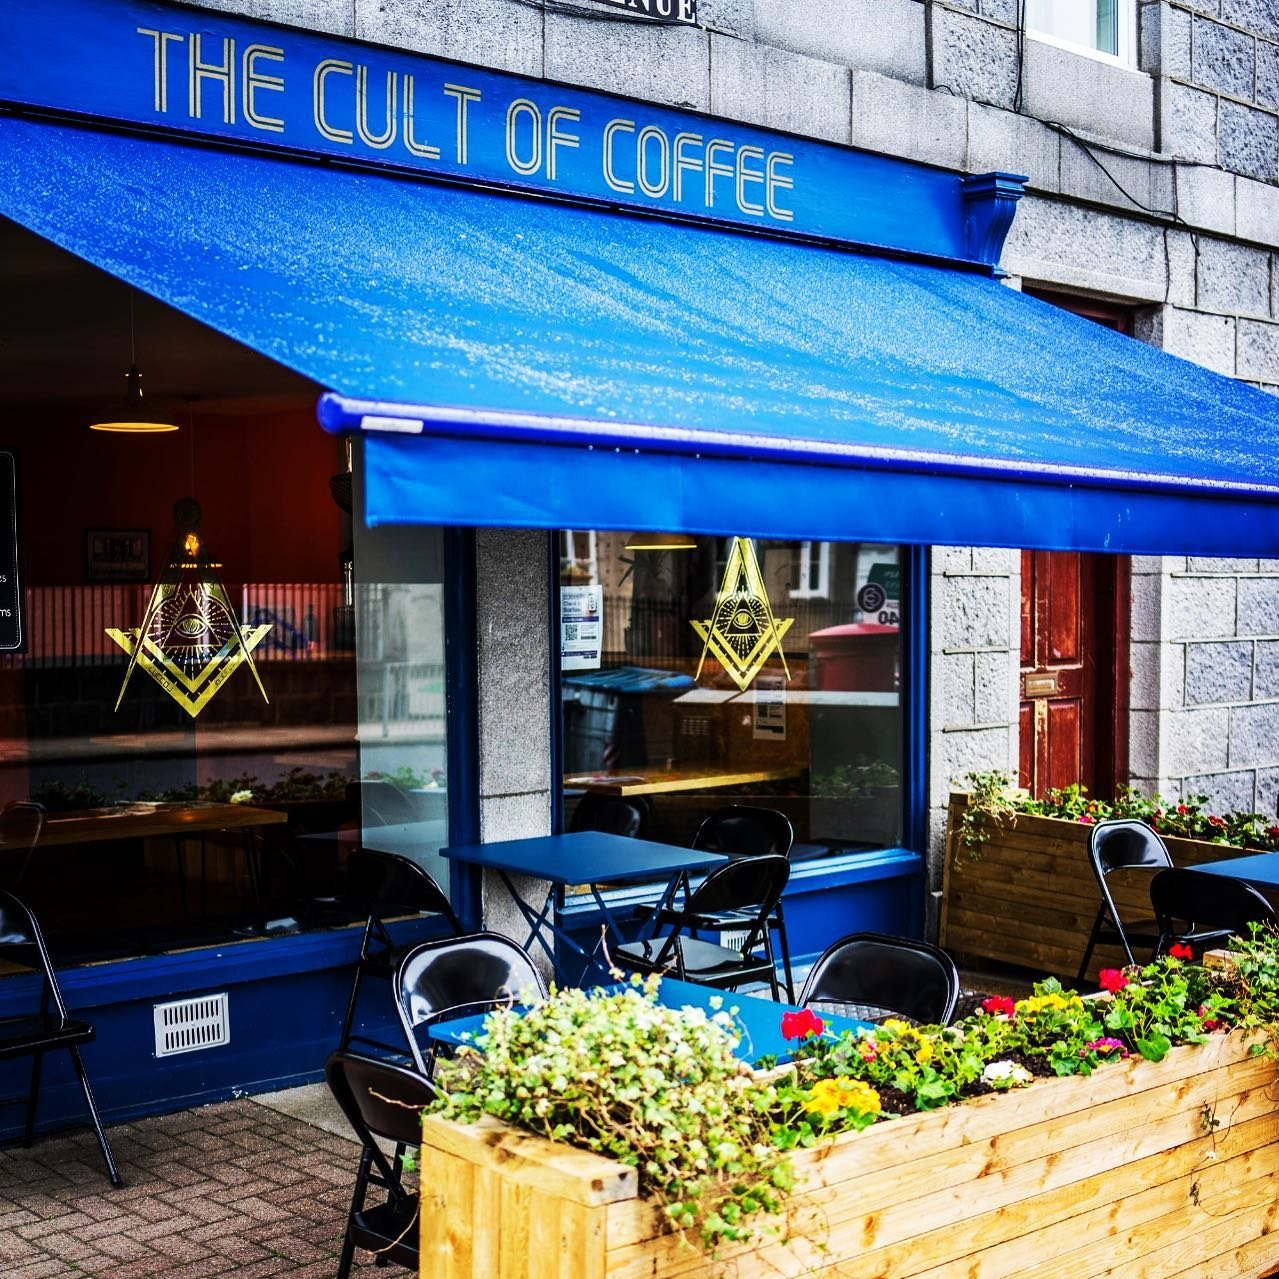 HOOKED RAG RUGGING Workshop – Wednesday 22nd May – Aberdeen (The Cult of Coffee)